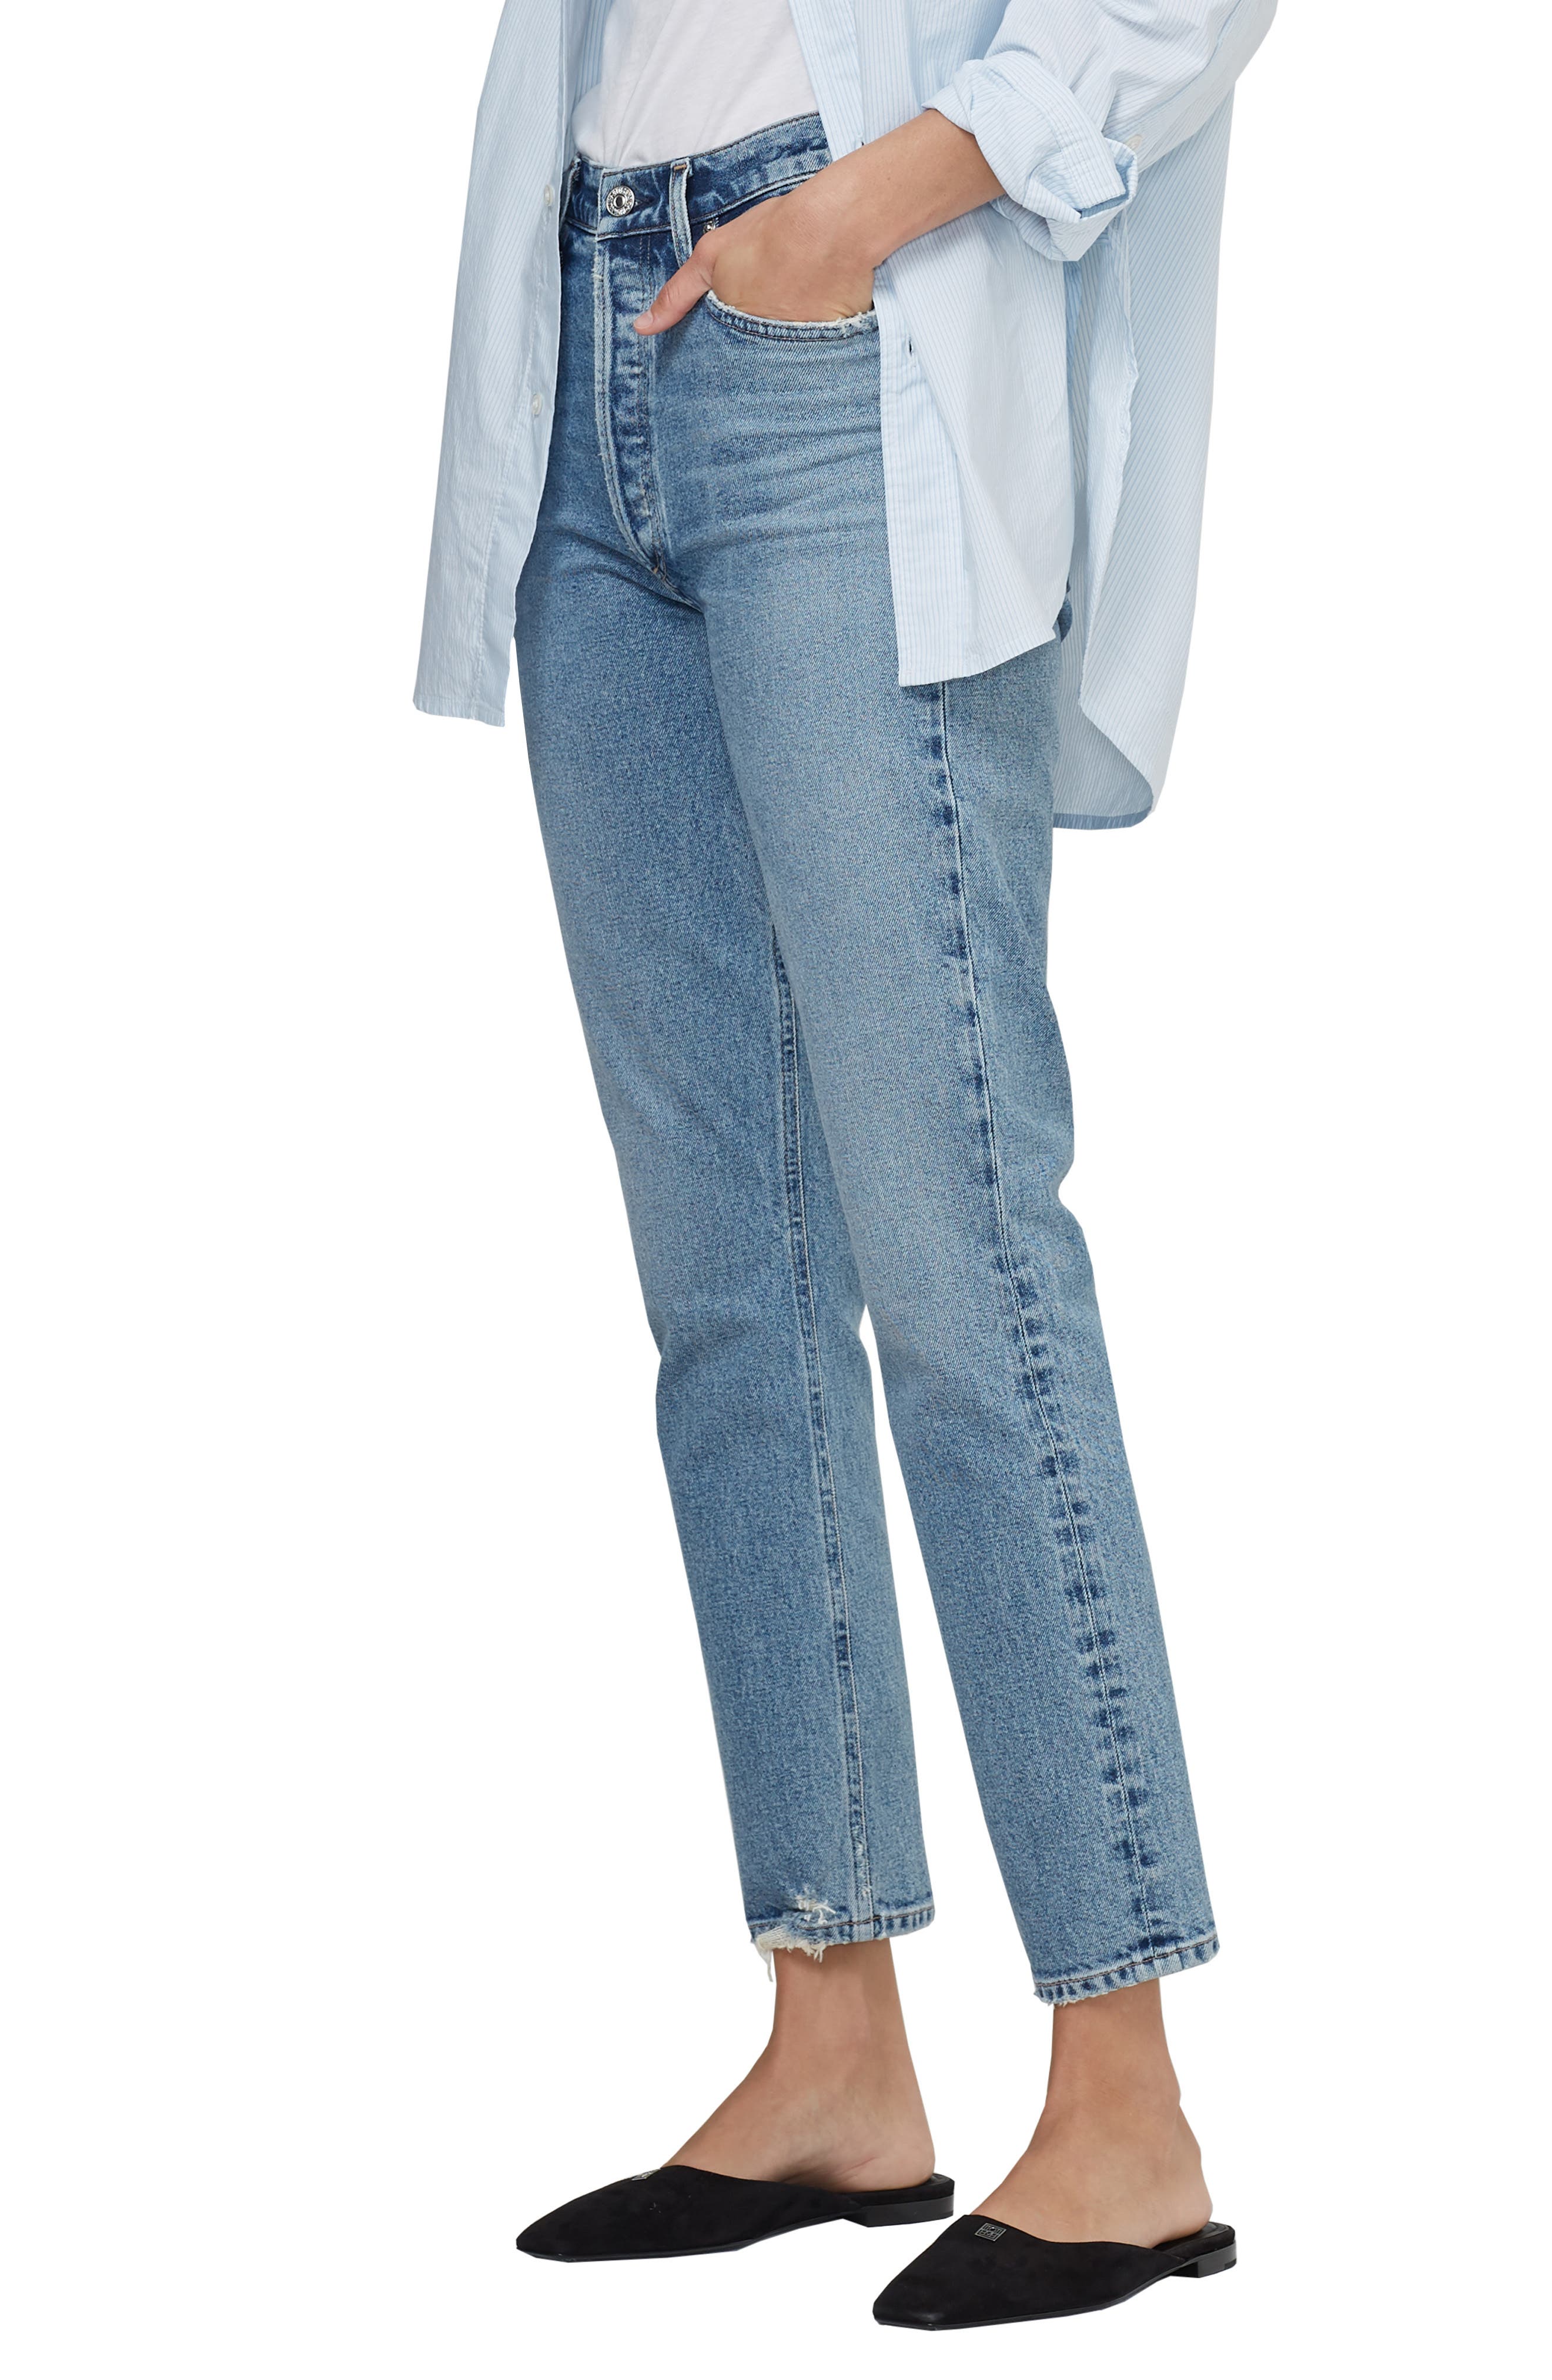 Citizens of Humanity Denim High-Rise Cropped Jeans Daphne in Blau Damen Bekleidung Jeans Capri-Jeans und cropped Jeans 